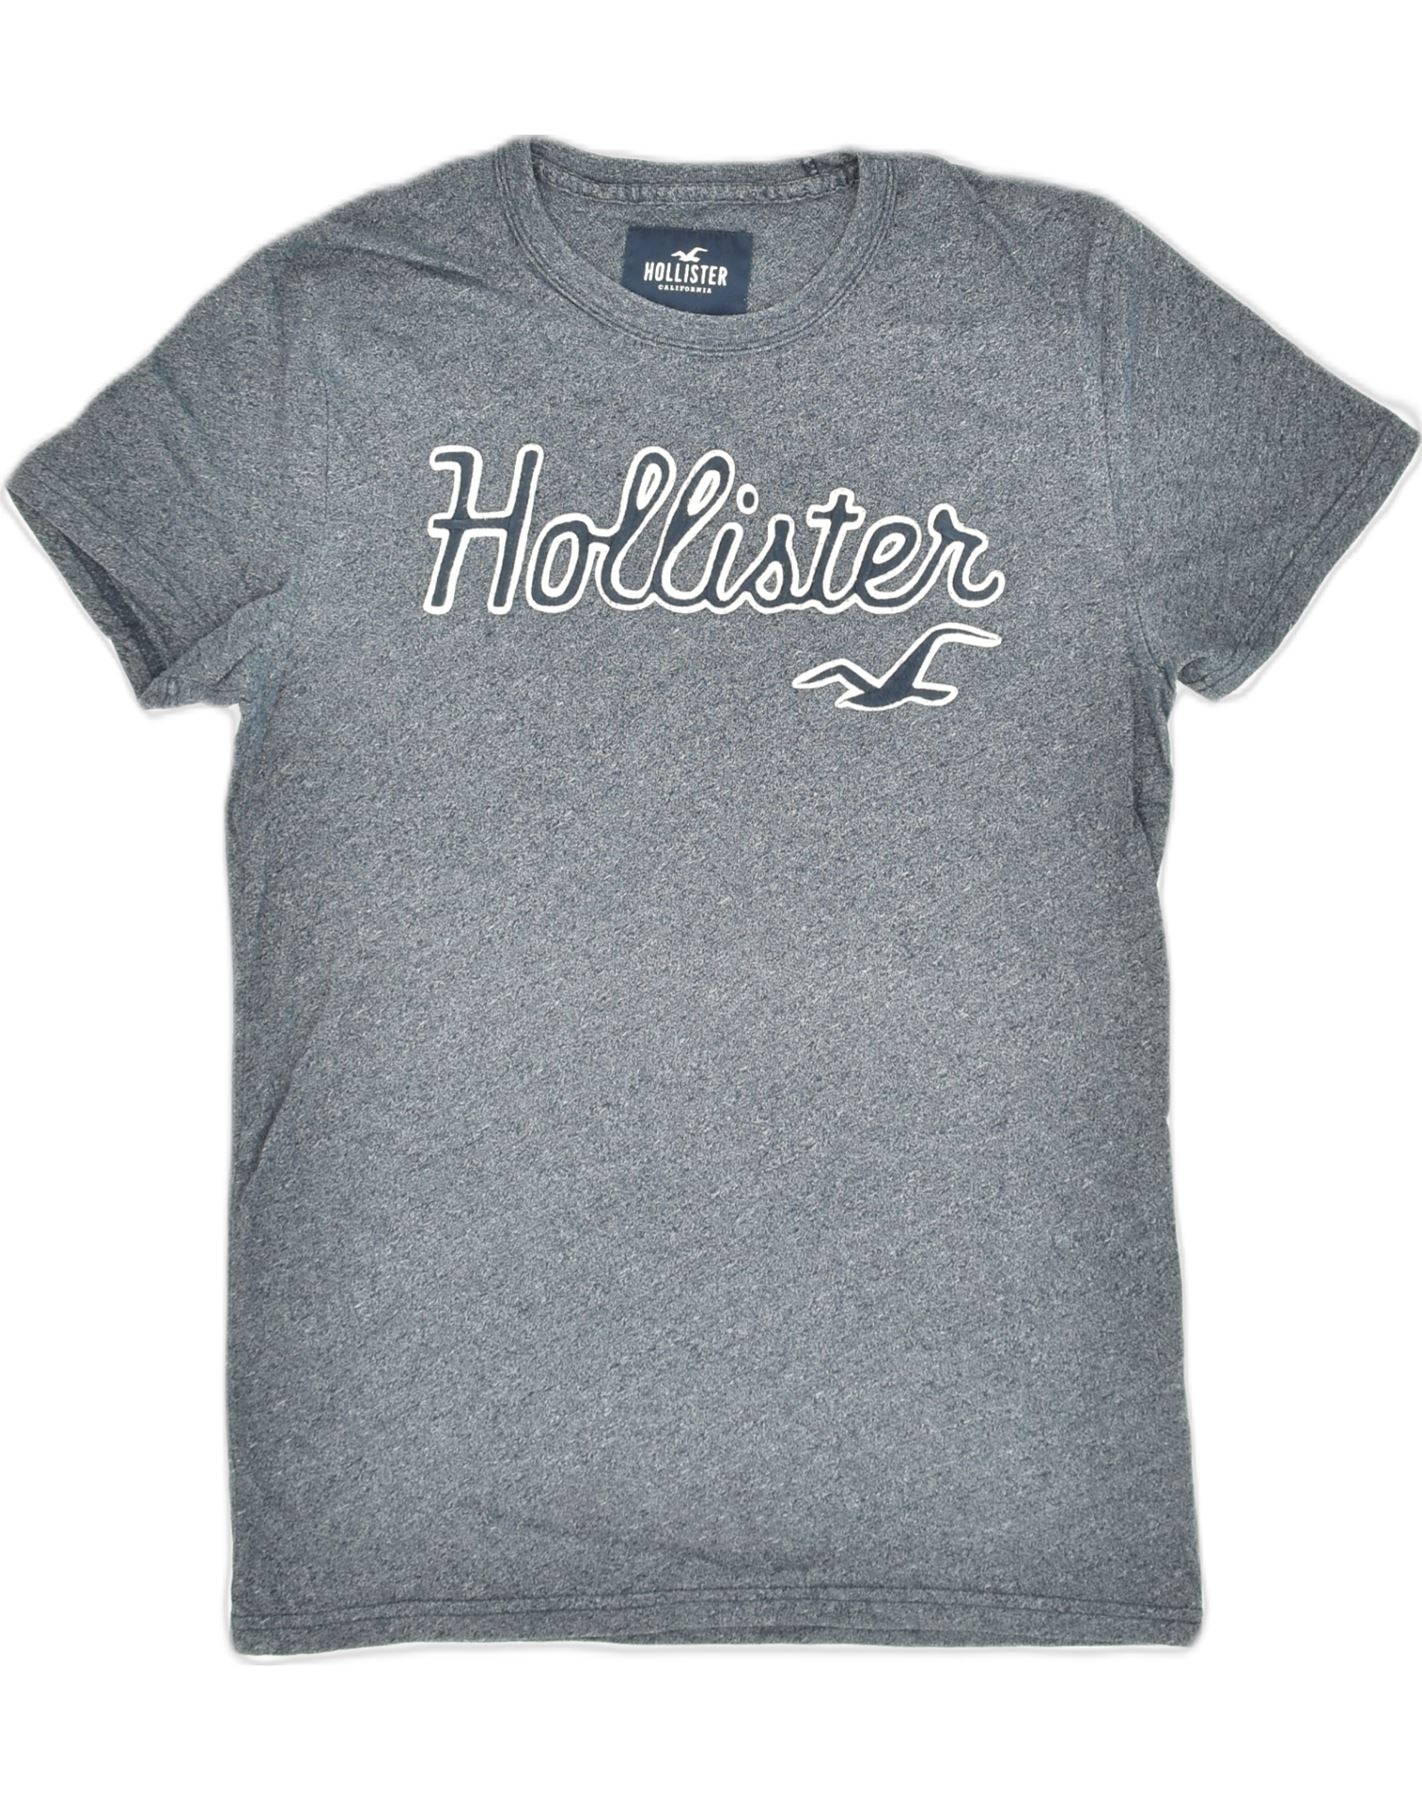 HOLLISTER Mens Graphic T-Shirt Top Small Grey Cotton, Vintage &  Second-Hand Clothing Online